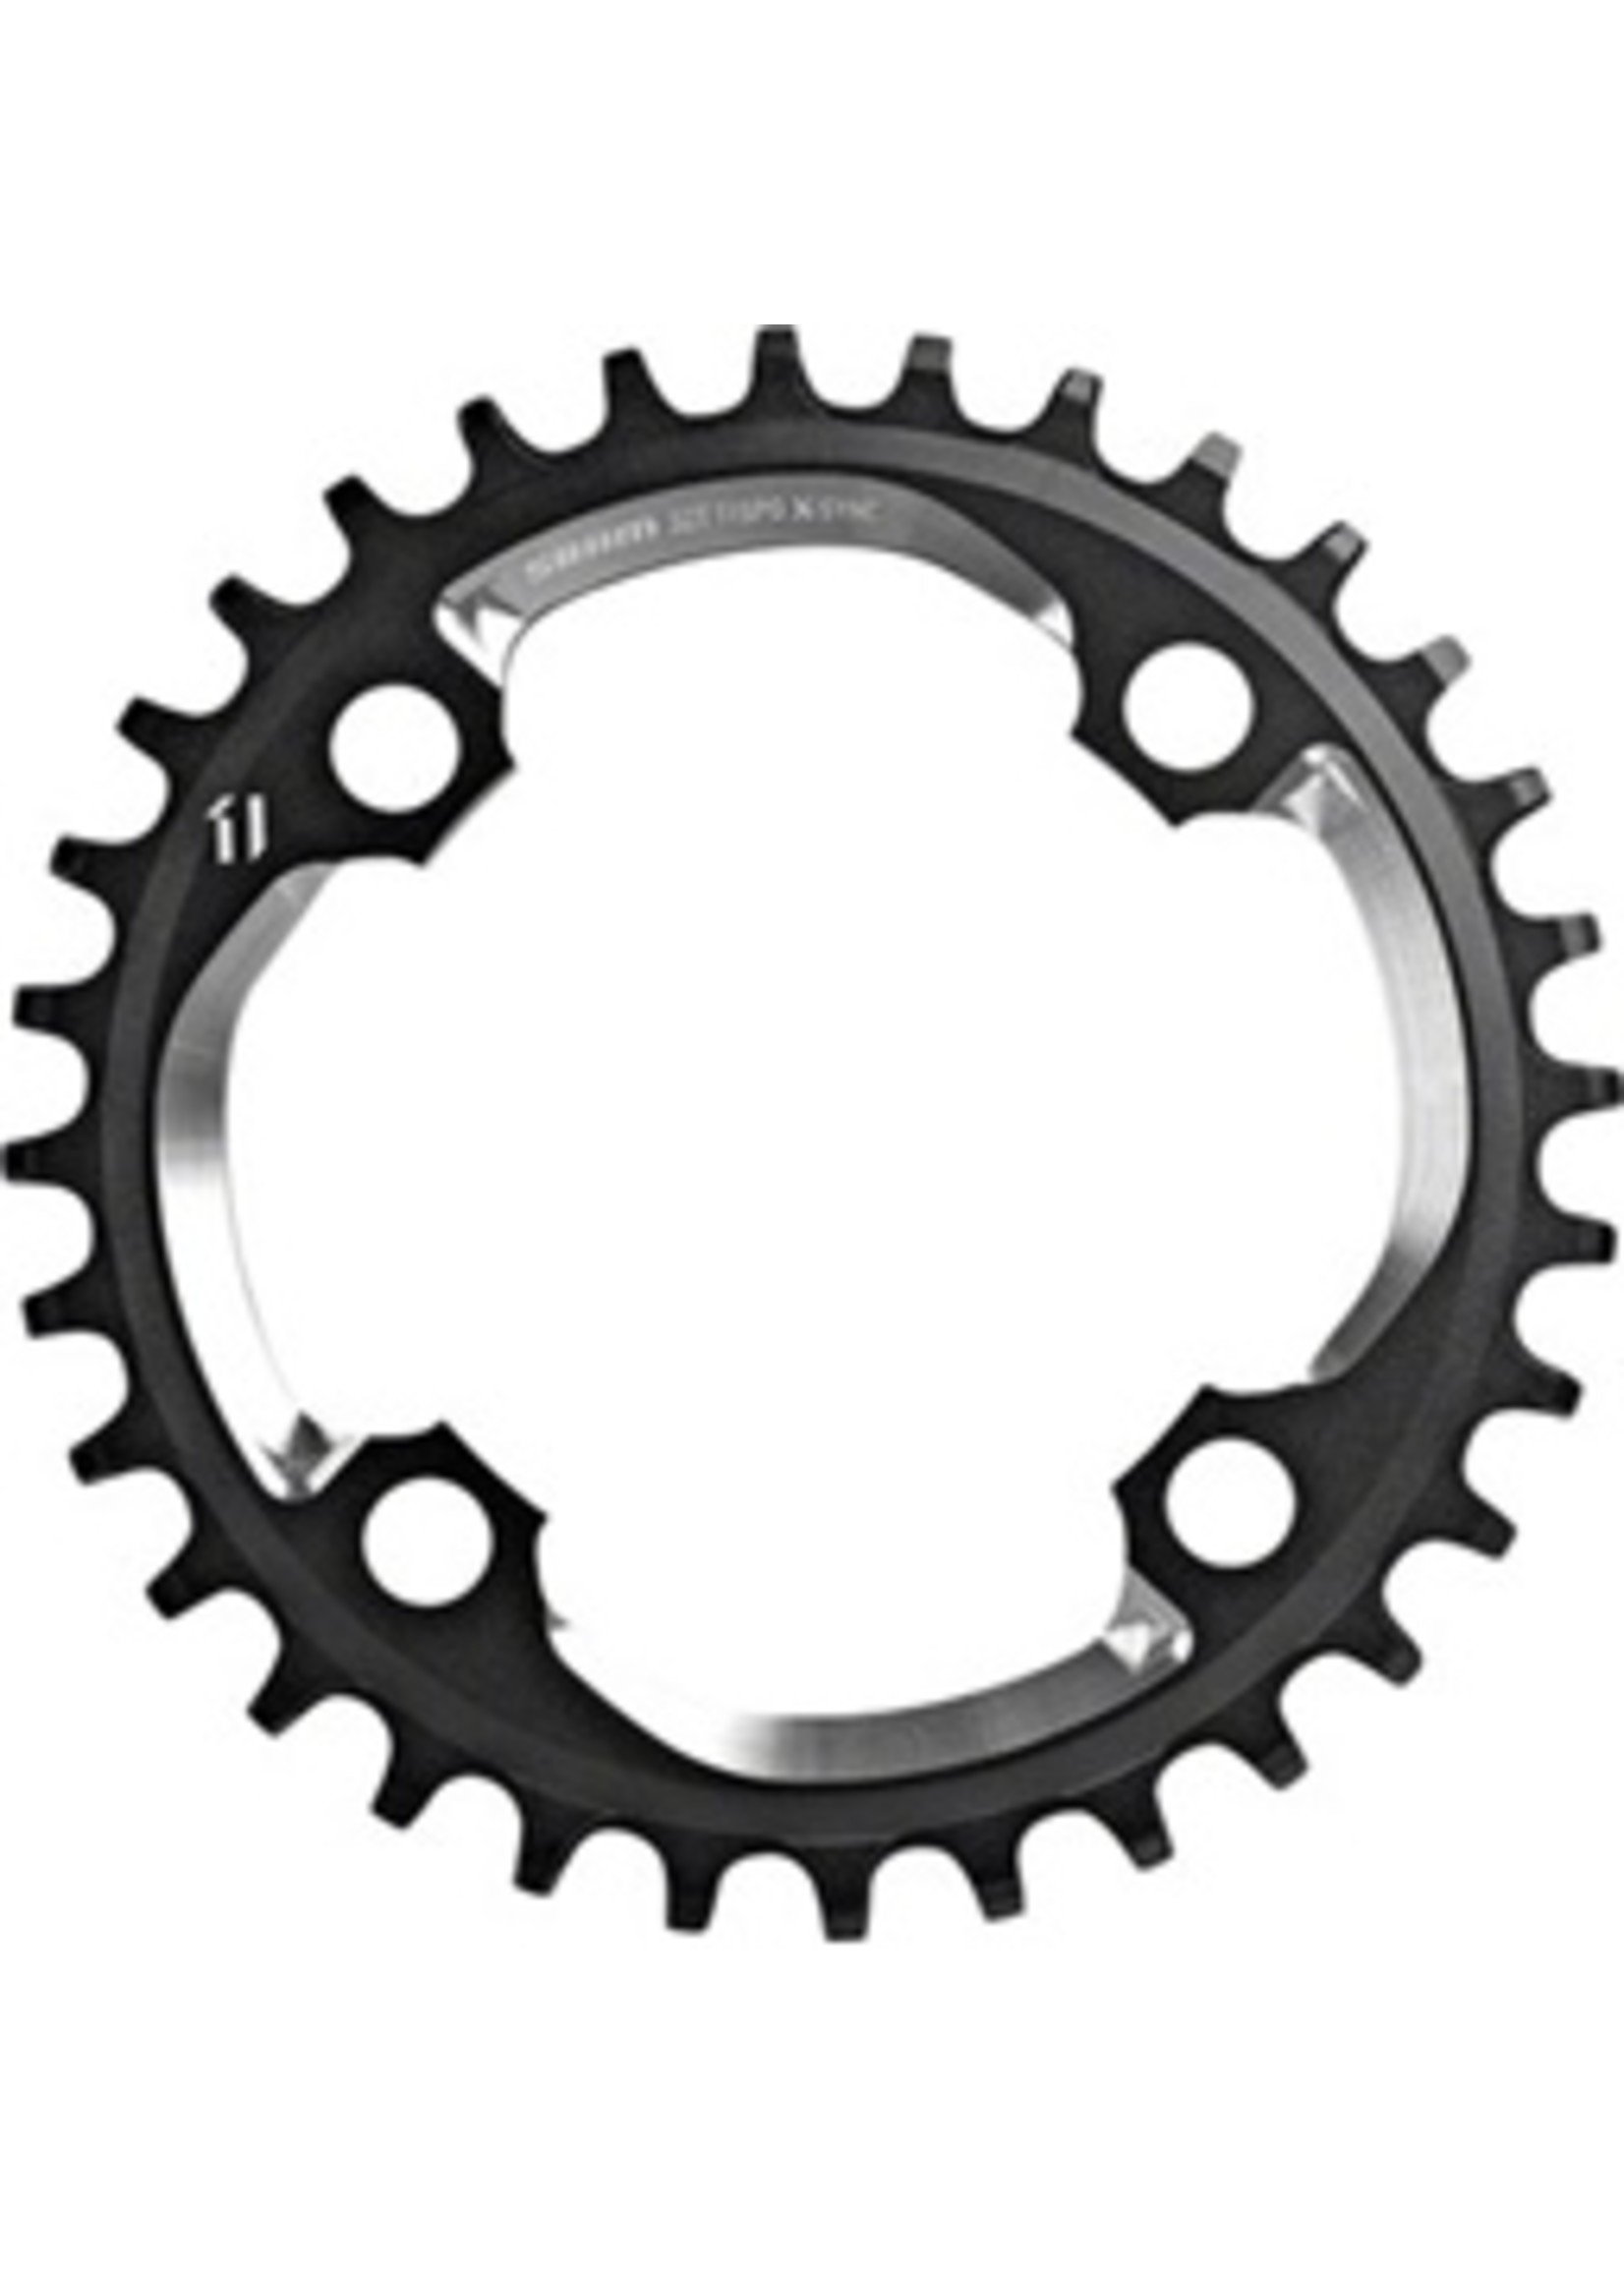 SRAM SRAM X01 X-Sync 34 Tooth 94mm BCD 4-Bolt Chainring fits 10 and 11 Speed SRAM Chains